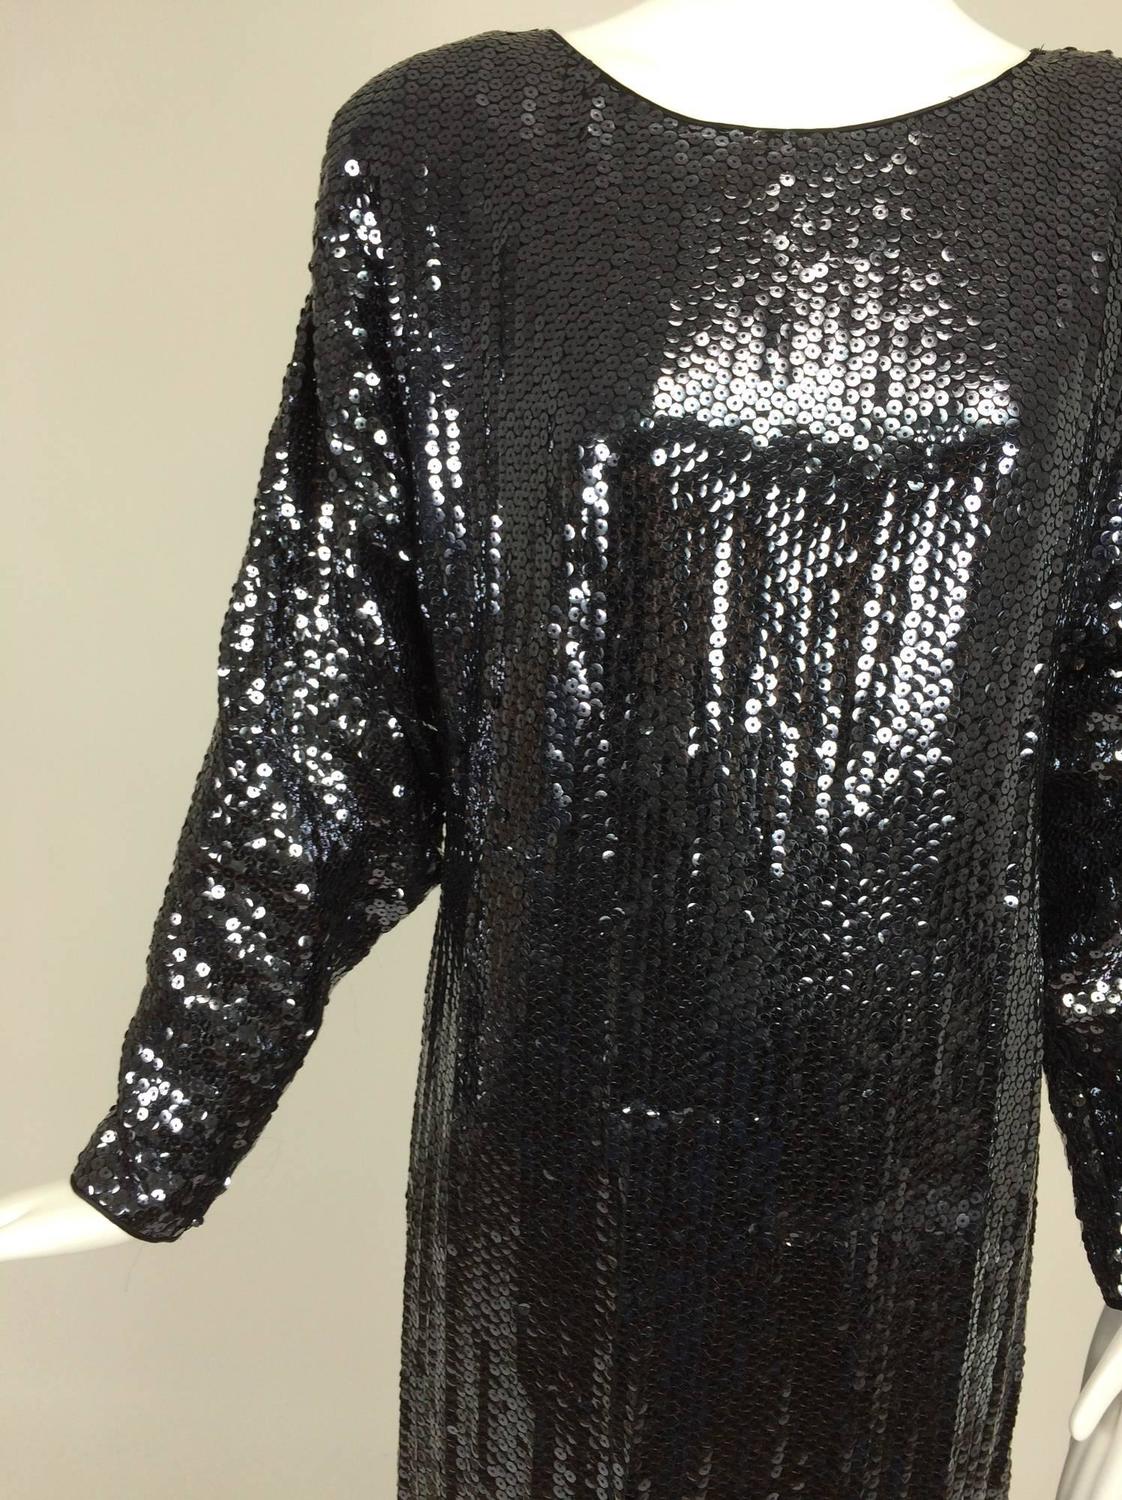 Halston glittery black sequin bat wing evening gown For Sale at 1stdibs